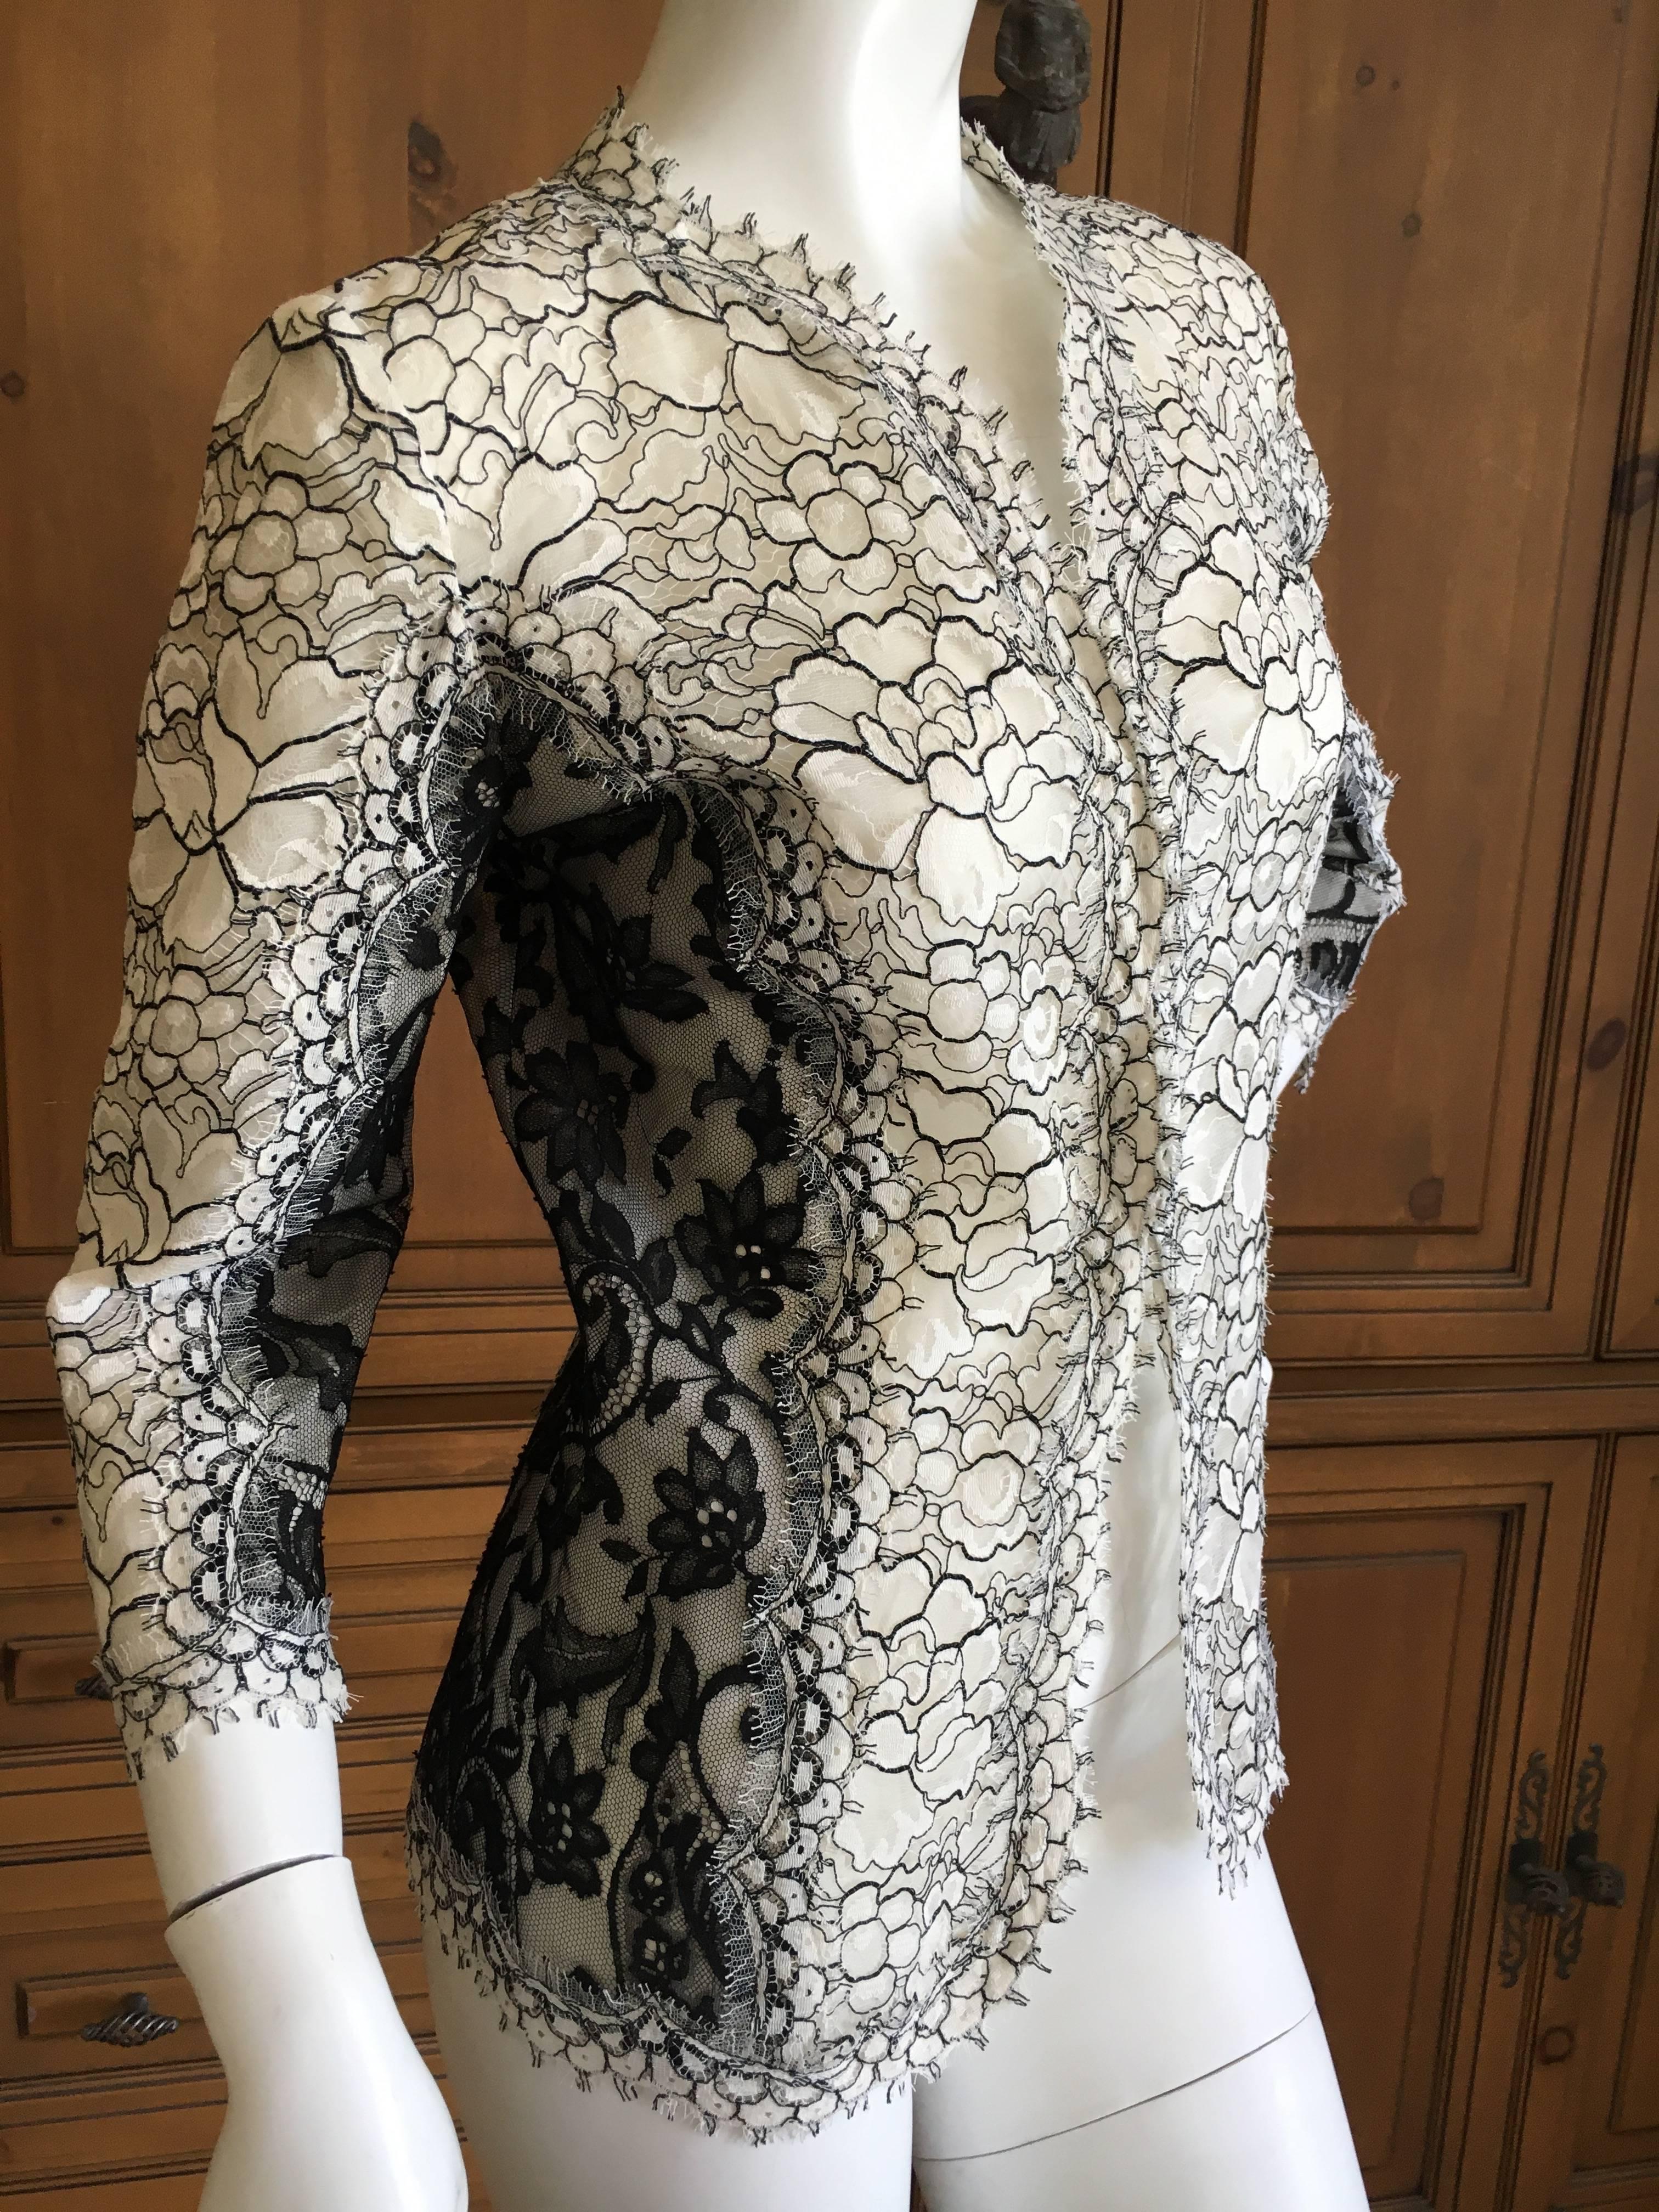 Beautiful lightweight lace jacket from Andrew Gn Paris
Size 36
Bust 36"
Waist 32"
Length 24"
Excellent condition